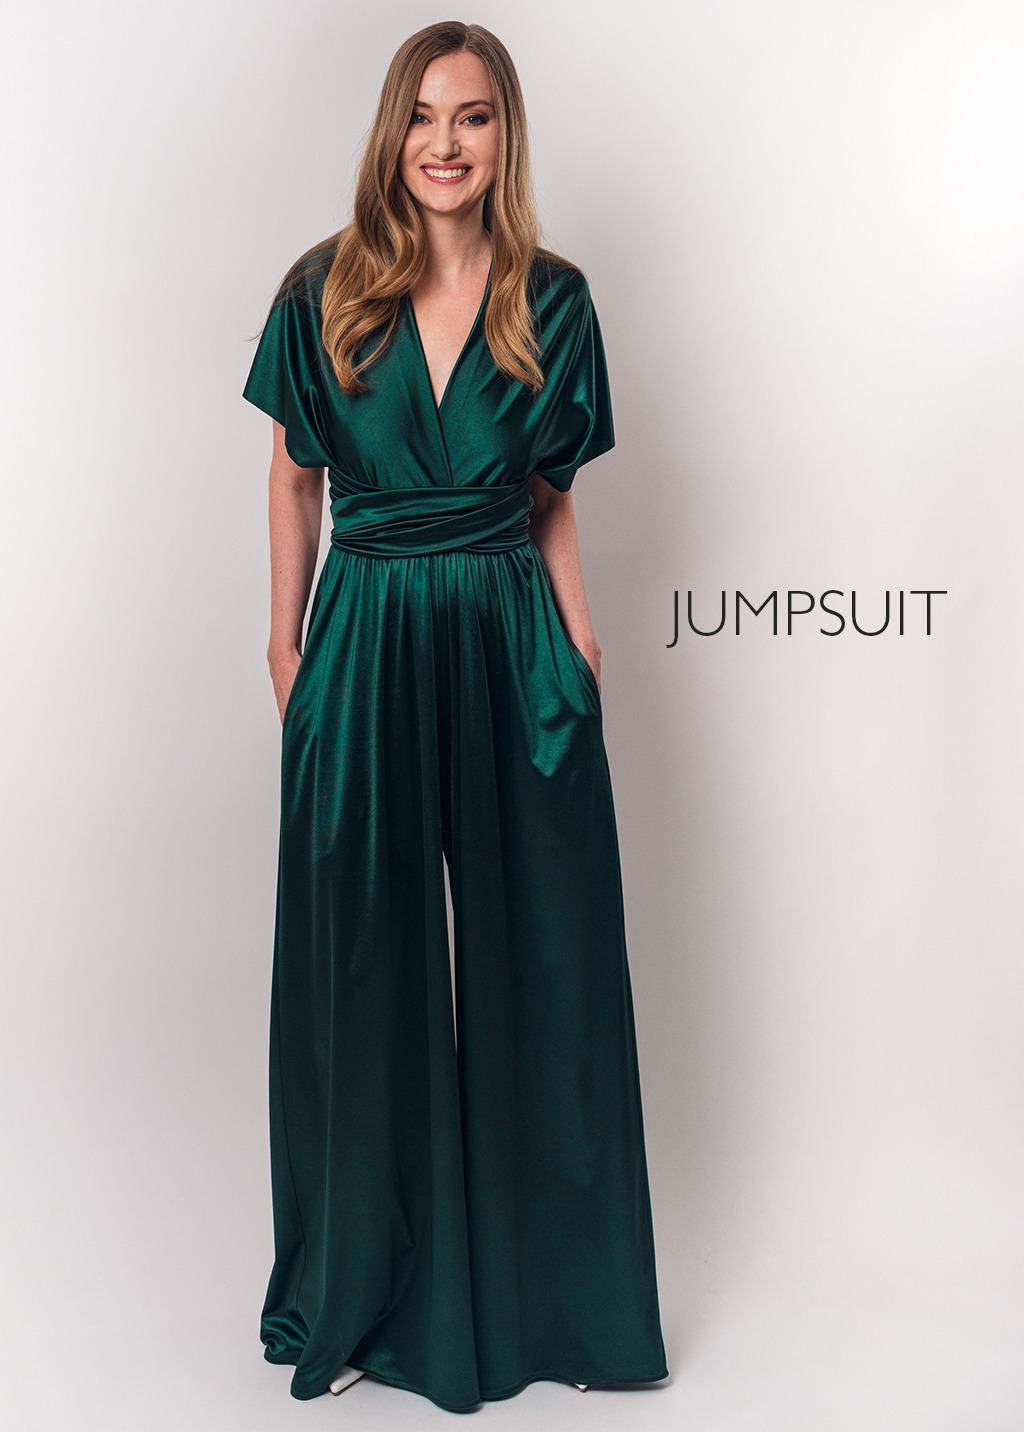 Gold luxury satin infinity dress or jumpsuit